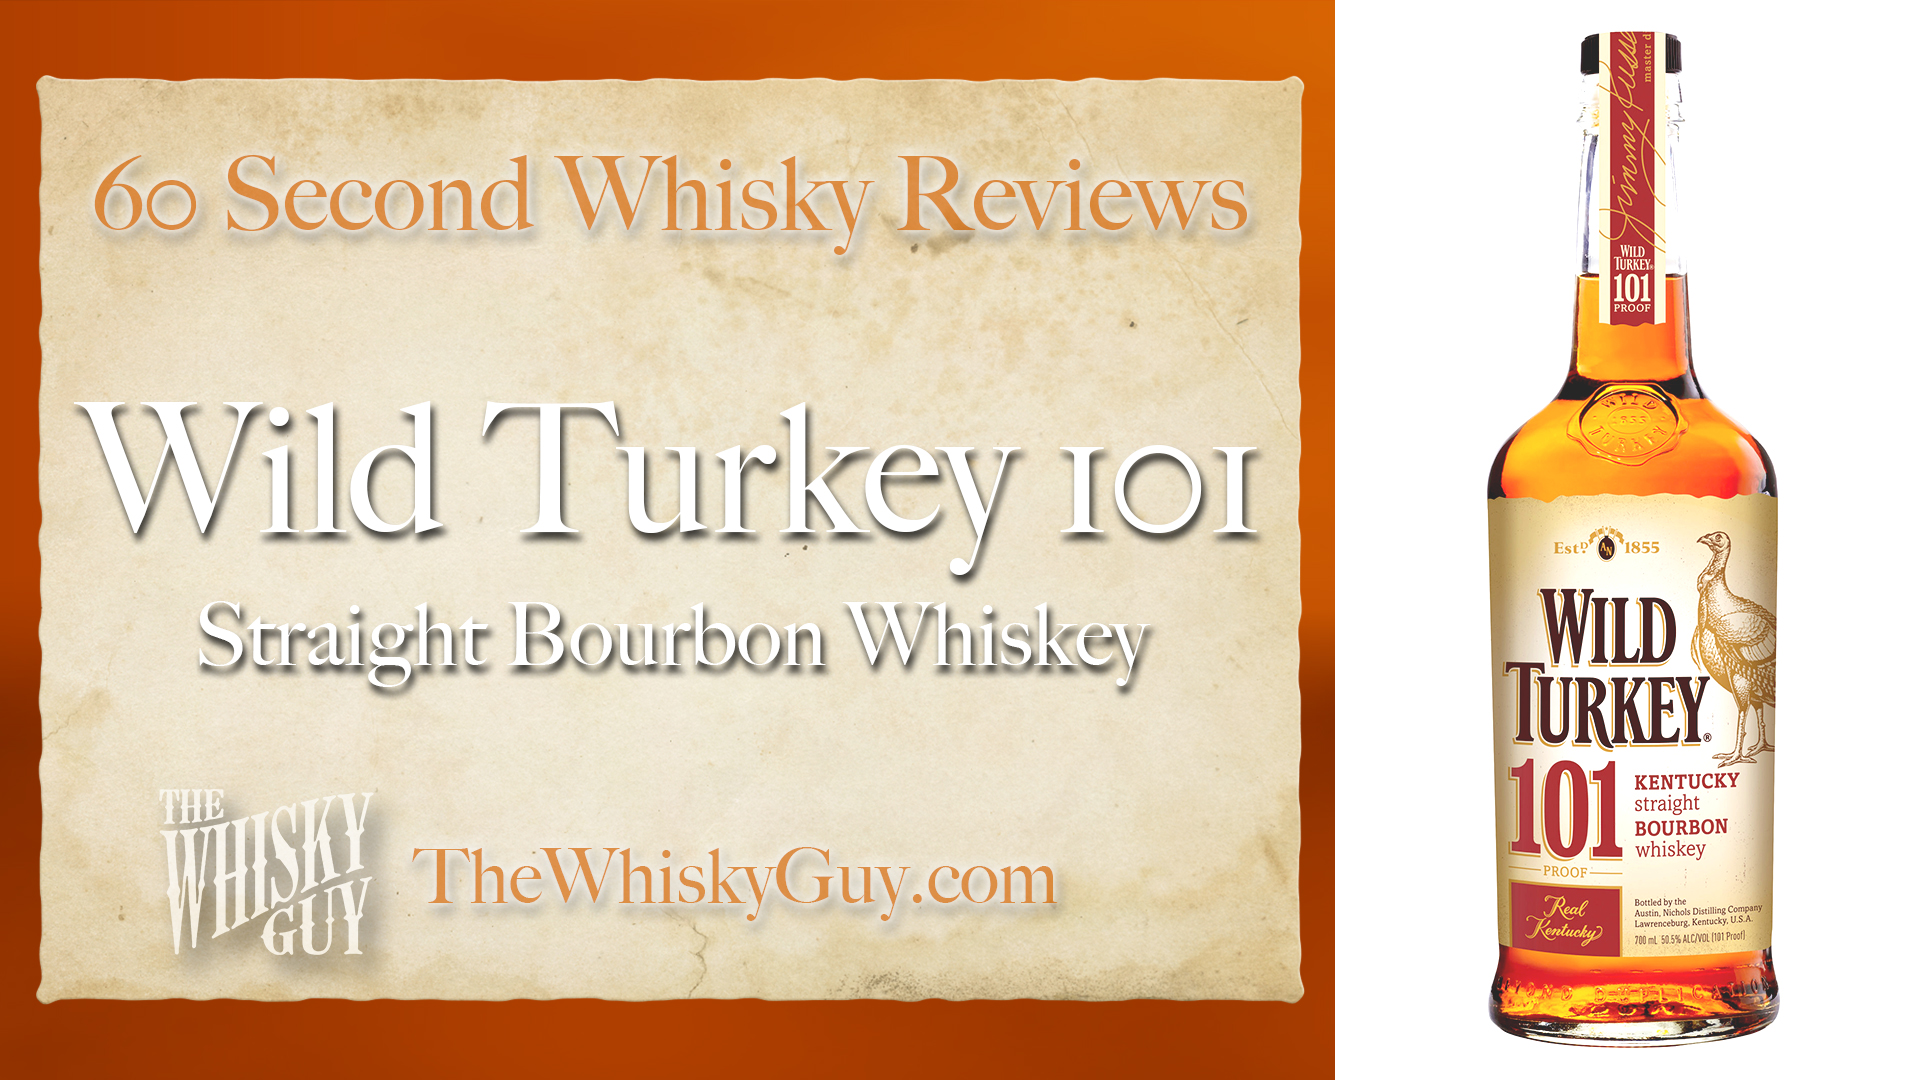 Does Wild Turkey 101 Straight Bourbon Whiskey belong in your liquor cabinet? Is it worth the price at the bar? Give The Whisky Guy 60 seconds and find out! In just 60 seconds, The Whisky Guy reviews Irish Whiskey, Scotch Whisky, Single Malt, Canadian Whisky, Bourbon Whiskey, Japanese Whisky and other whiskies from around the world. Find more at TheWhiskyGuy.com. All original content © Ari Shapiro - TheWhiskyGuy.com